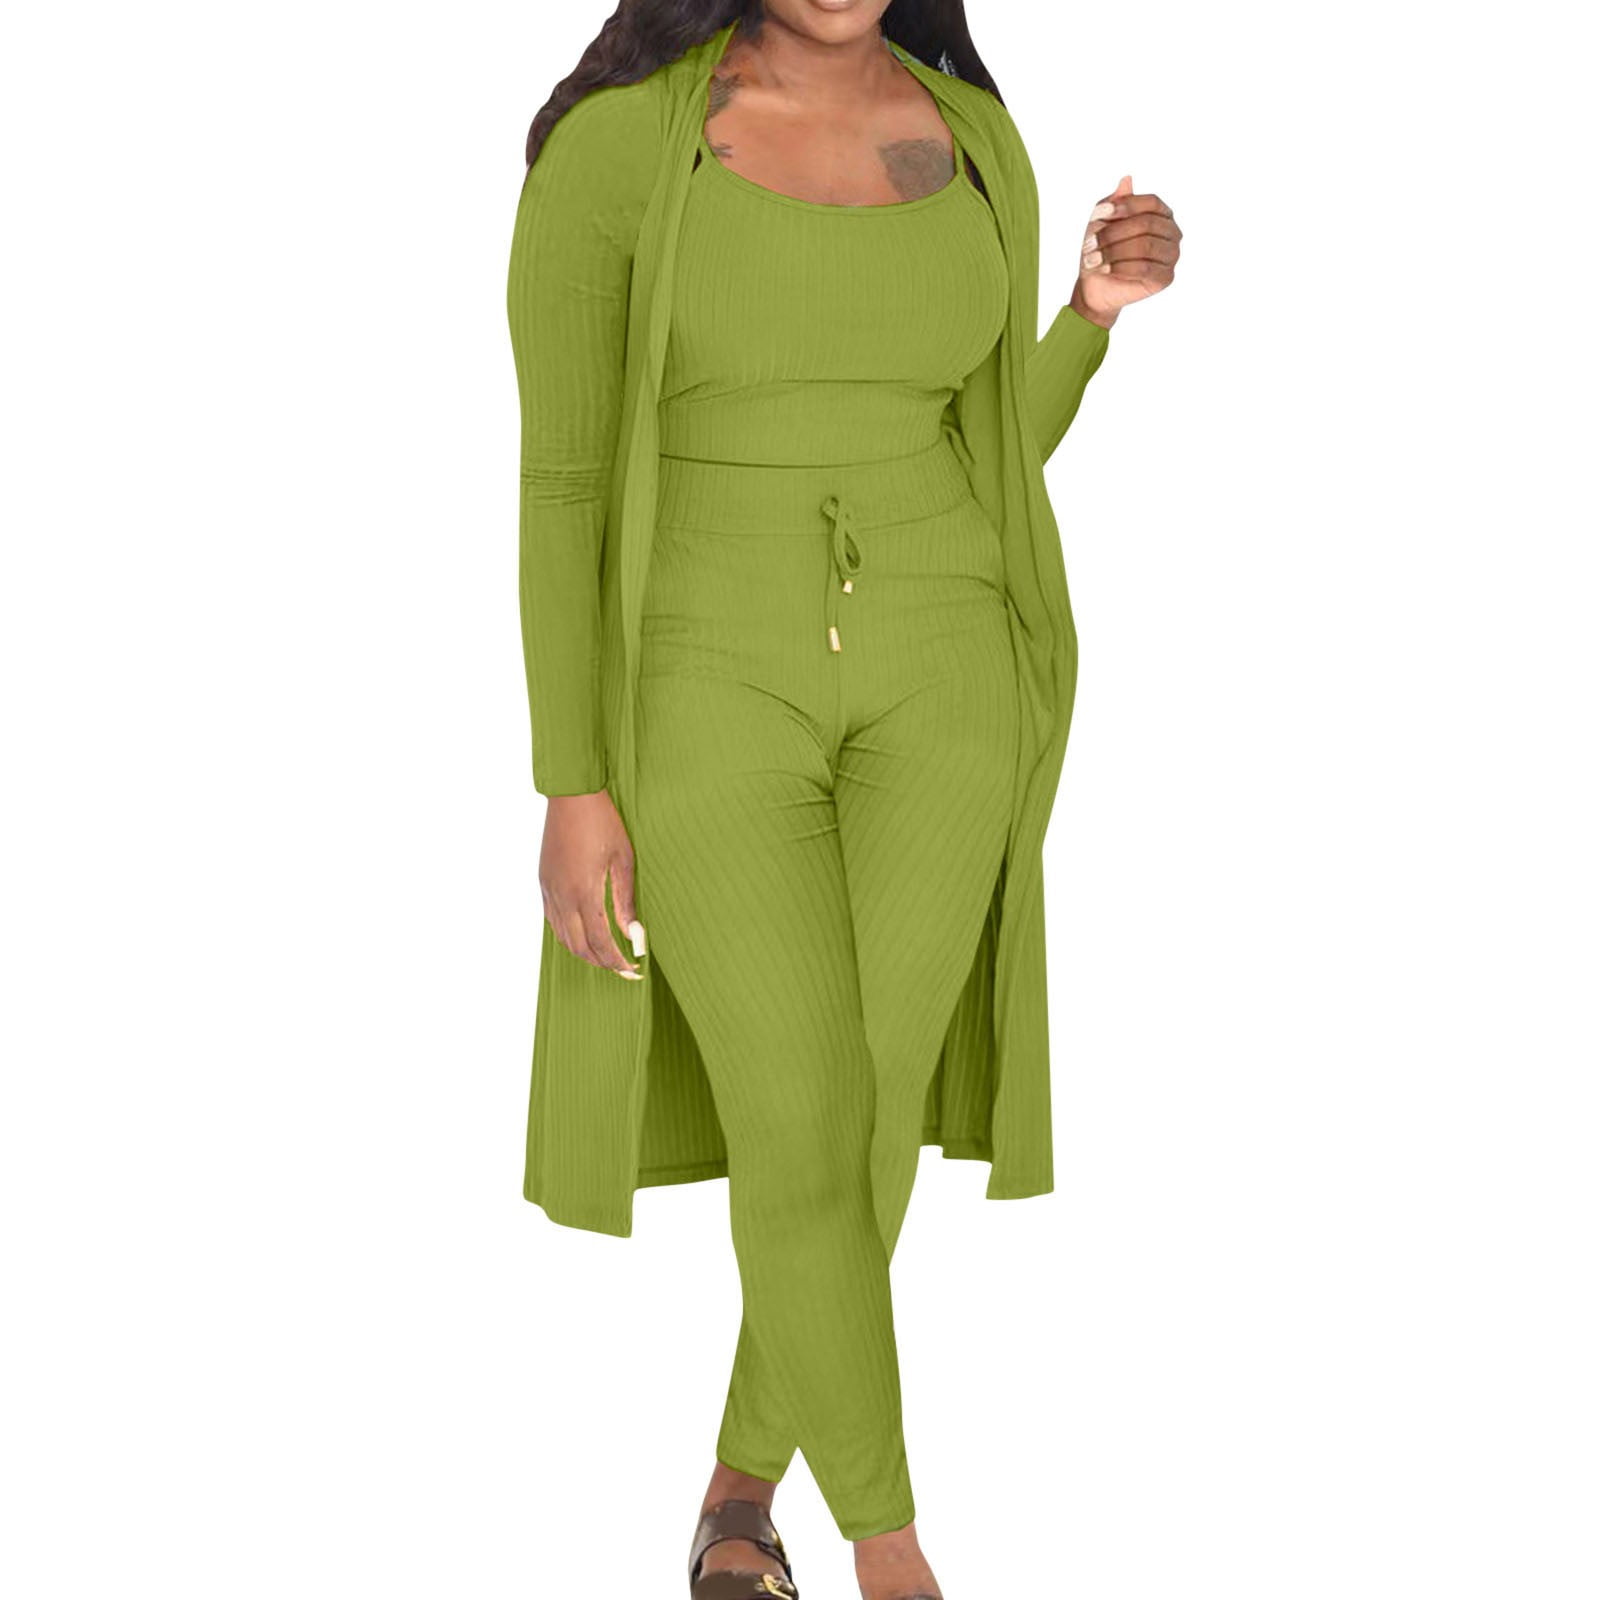 2DXuixsh Pant Suits for Women Dressy Wedding Guest Fall Winter Women  Stretchy Wear Solid Color 2 Piece Top and Pants Set Ladies Casual Two Outfits  Pant Suits for Women Plus Size Work